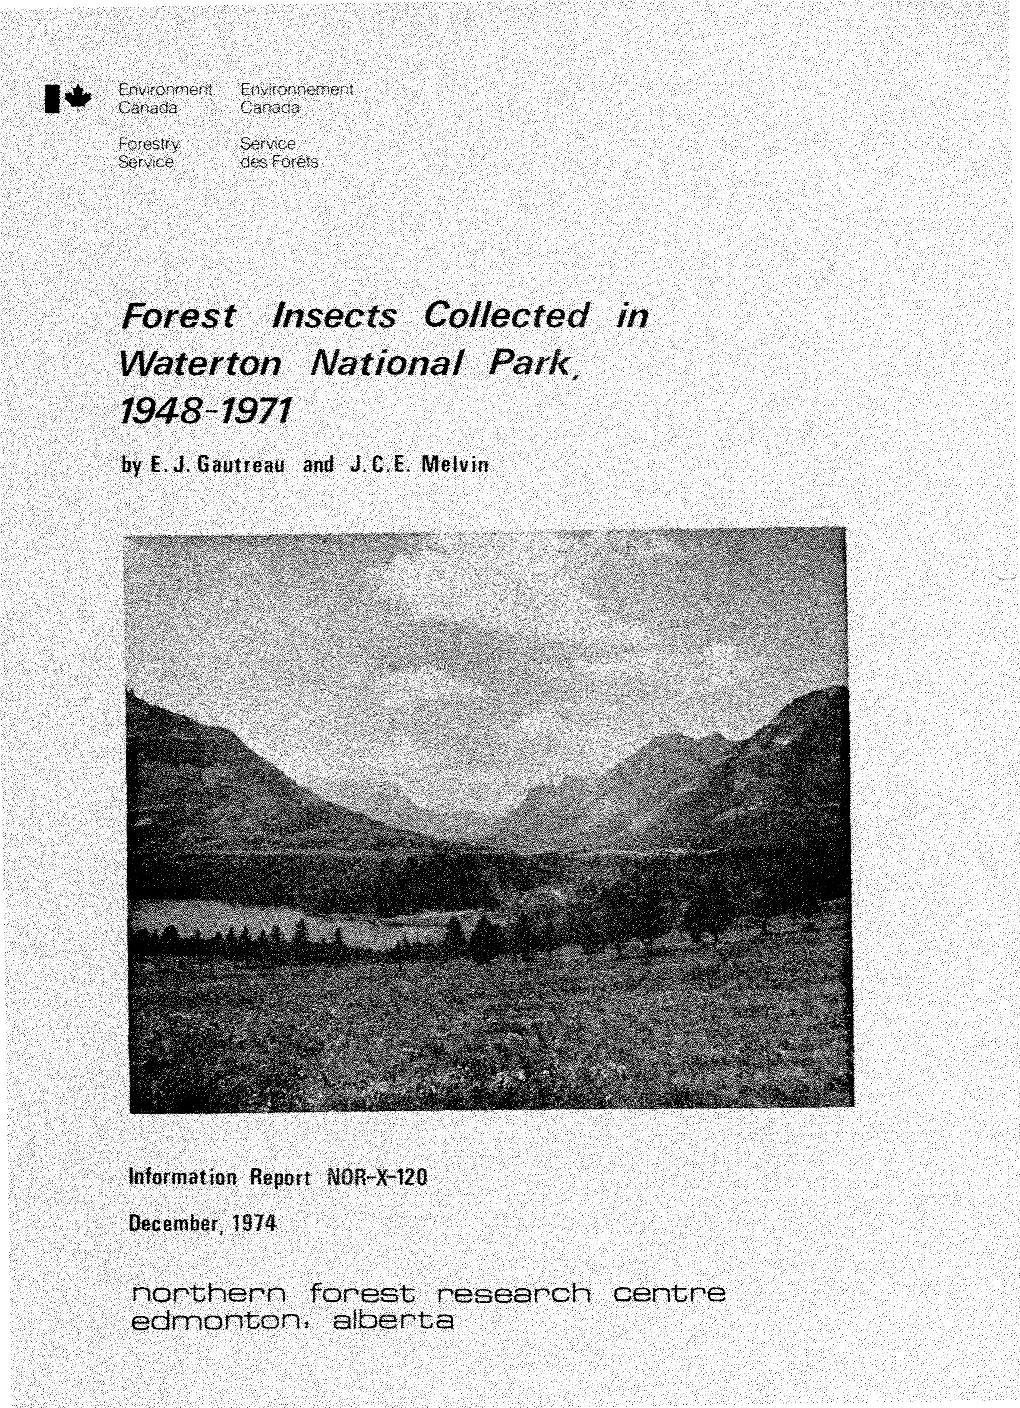 Forest Insects Collected in Waterton National Park, 1948-1971